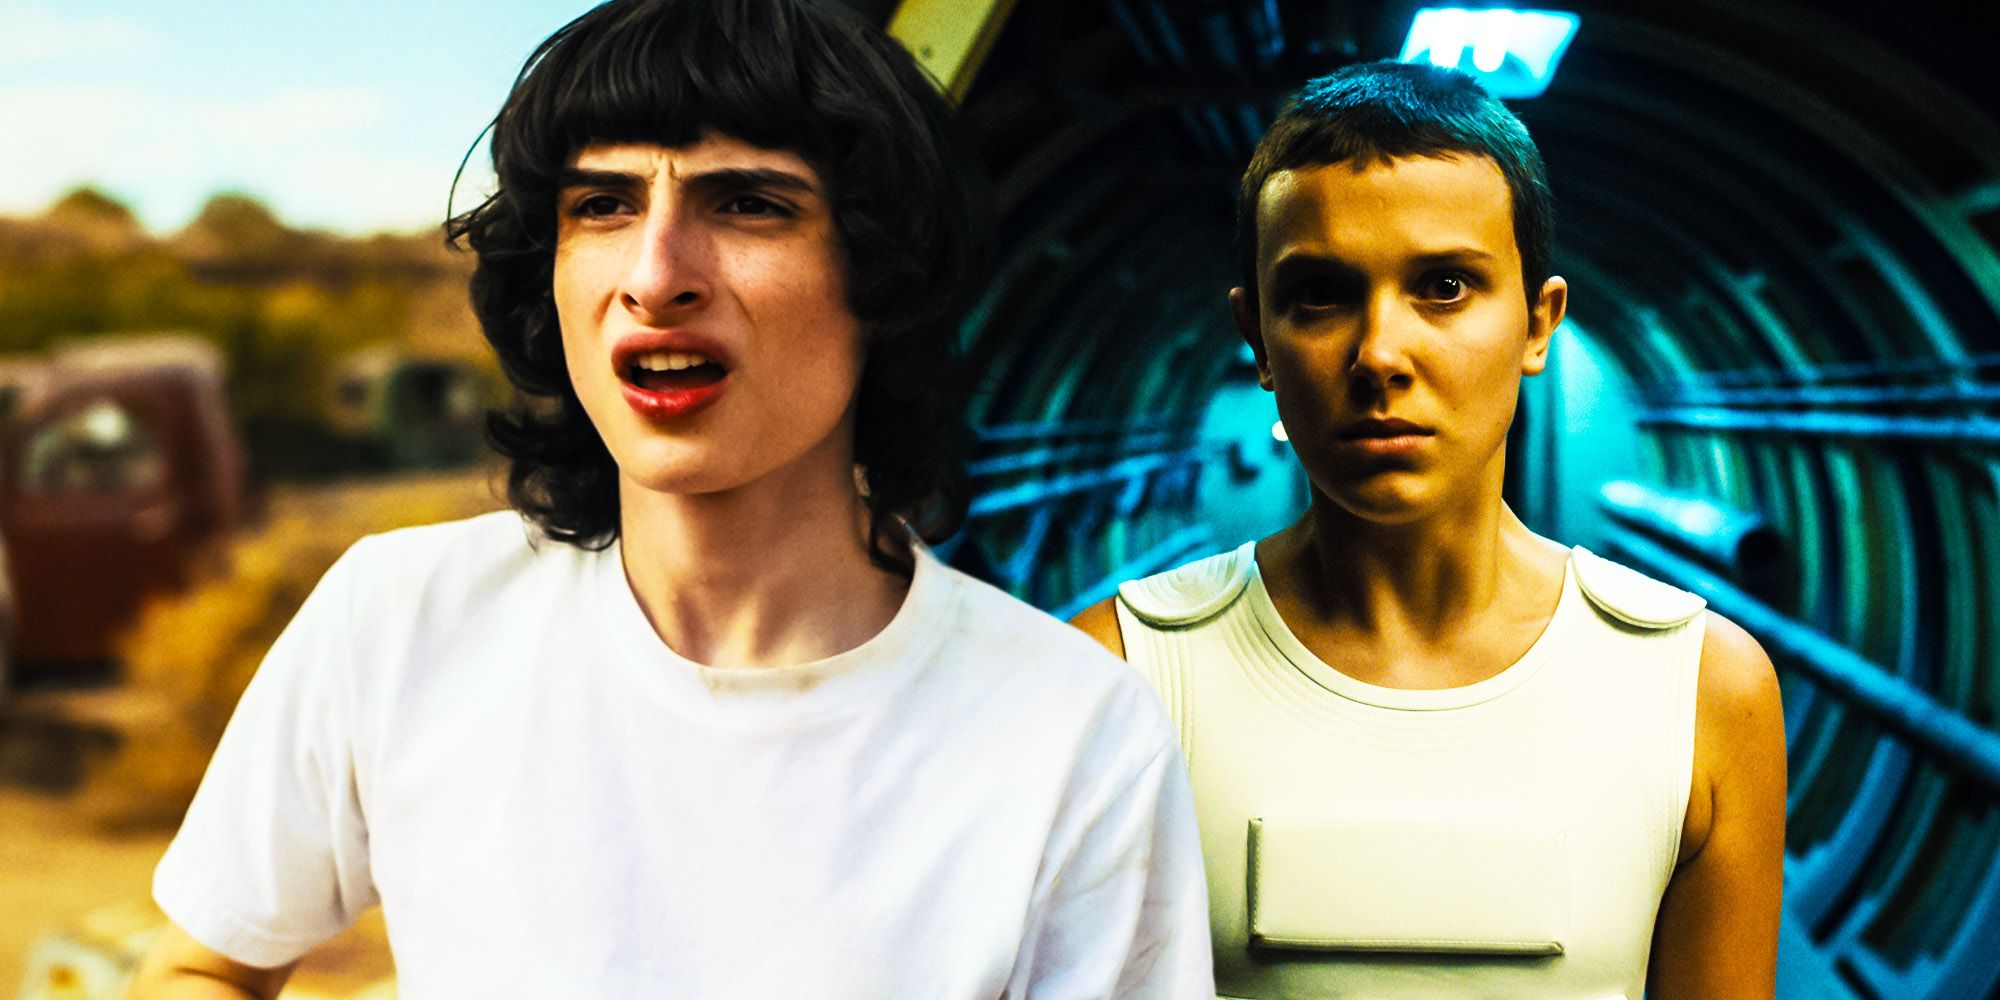 Why Eleven Could Kill Will In Stranger Things 5